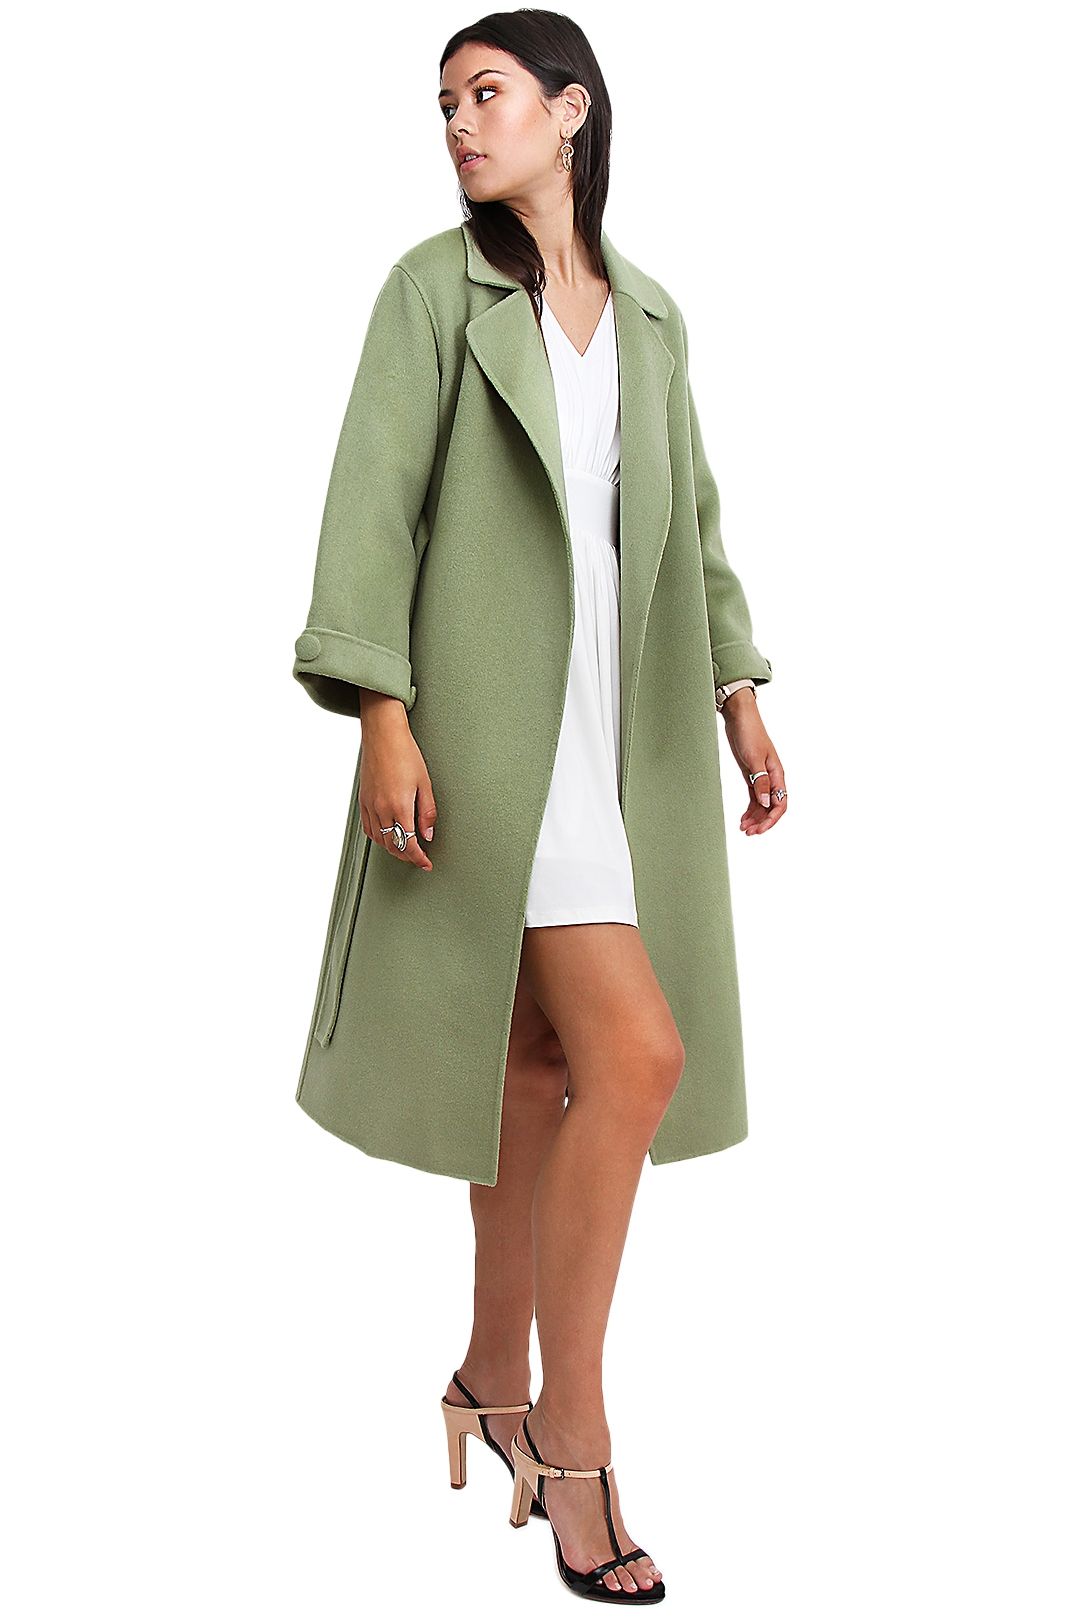 Belle and Bloom Stay Wild Coat Green Midi